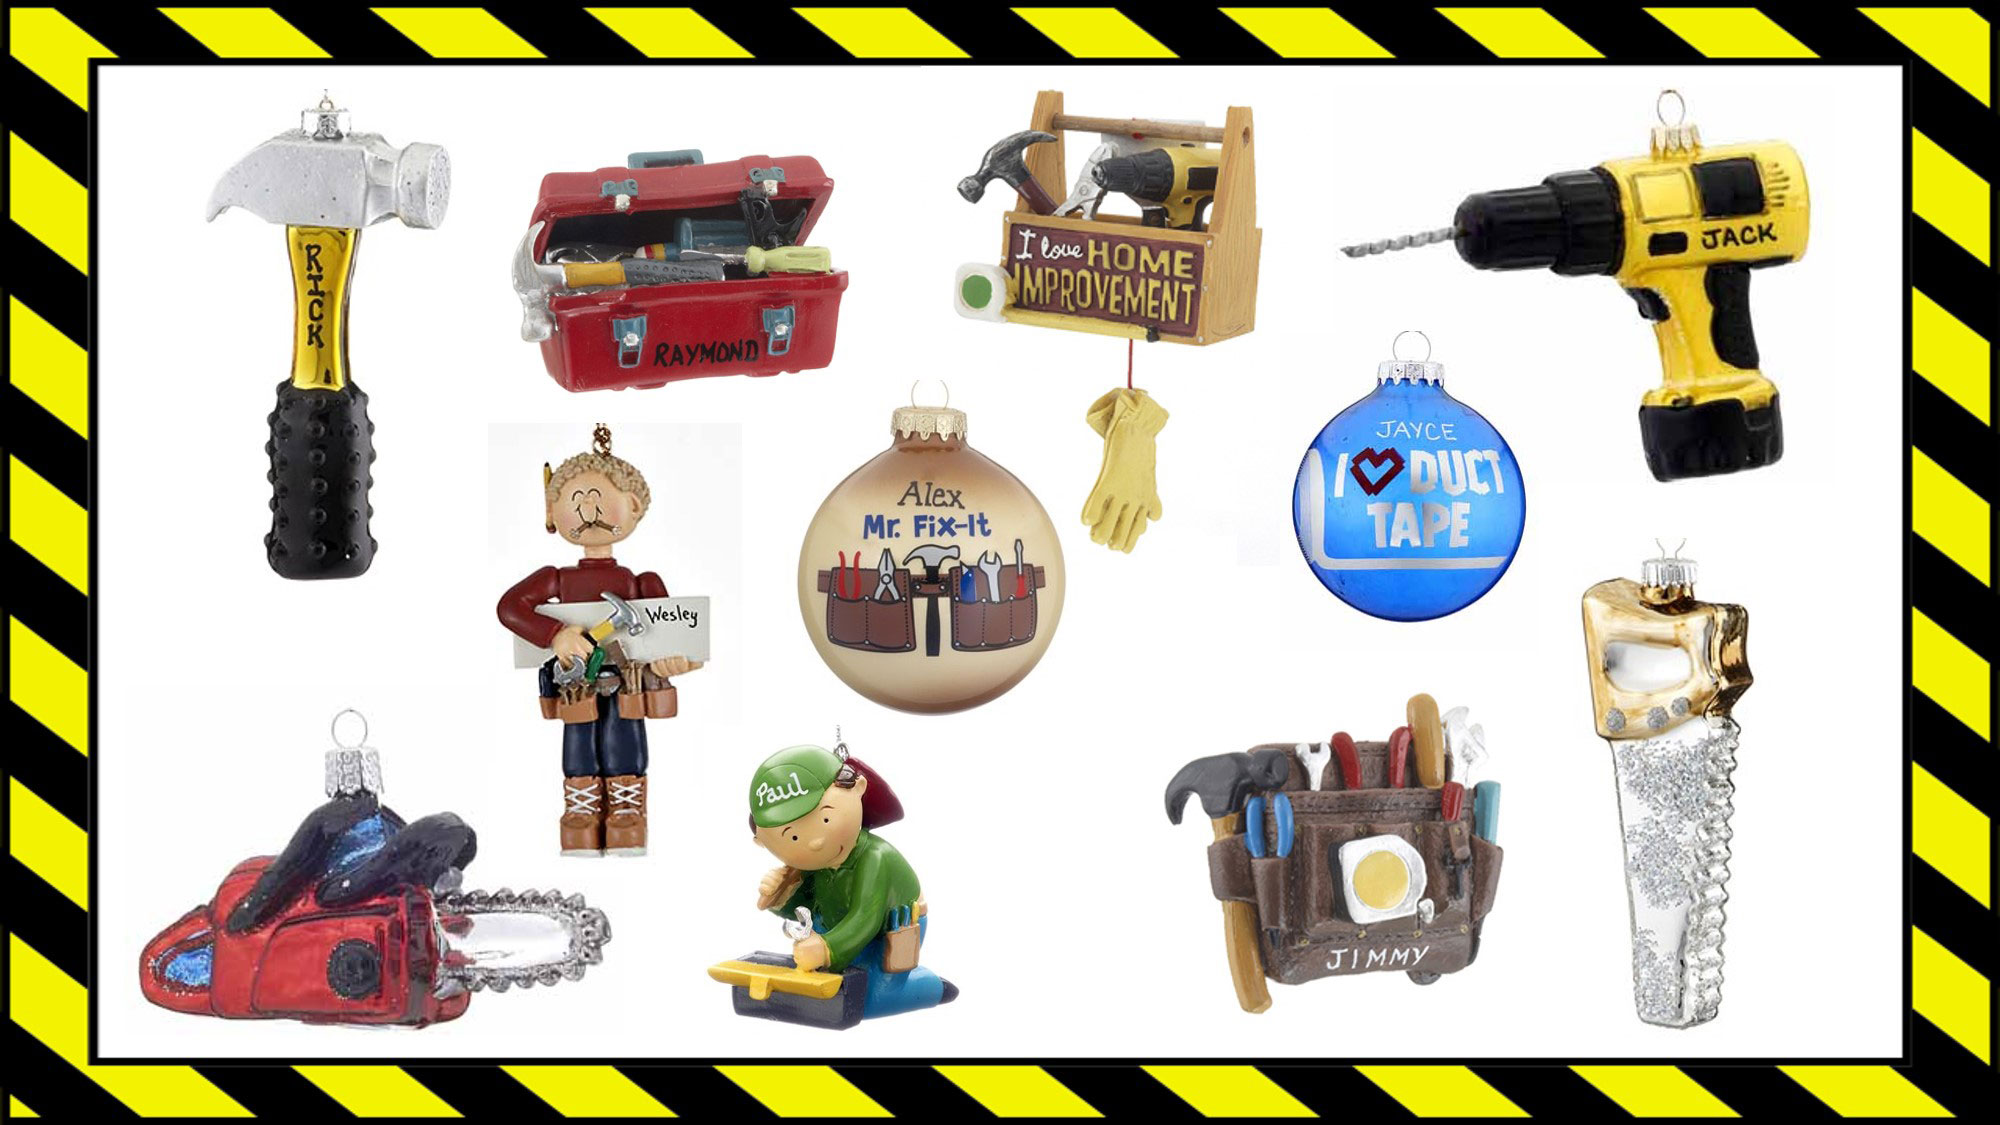 Ornaments for dads including construction worker, Mr. Fix It glass ball, hammer, chainsaw, and more tools. | OrnamentShop.com